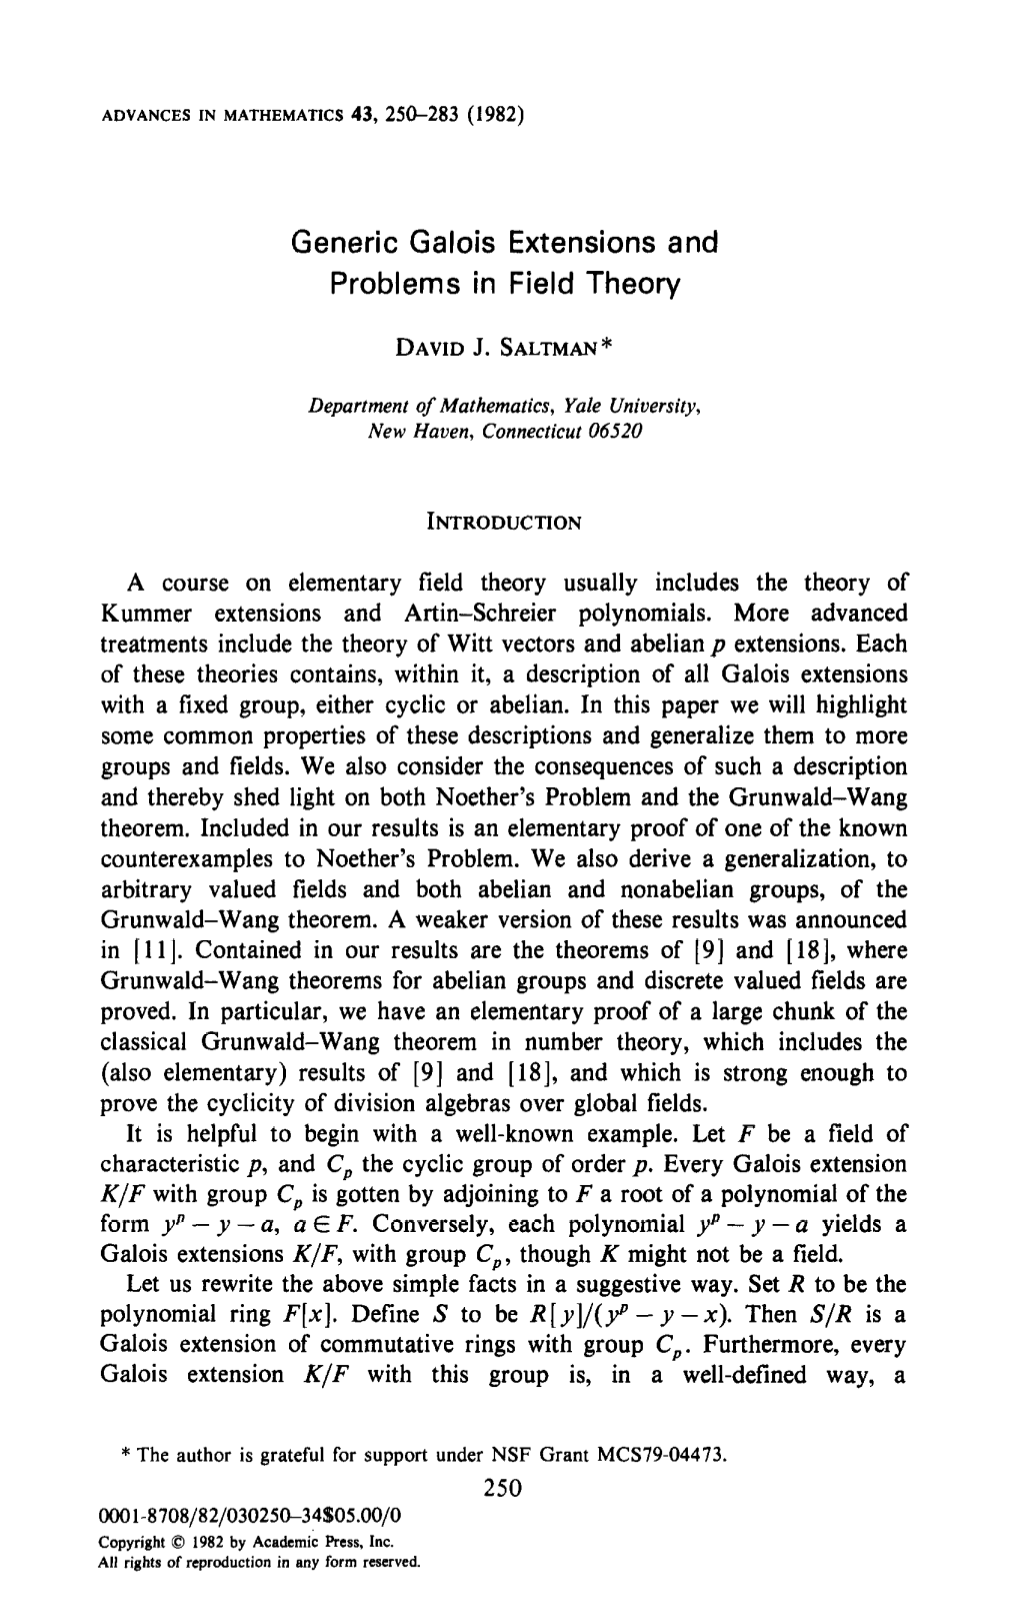 Generic Galois Extensions and Problems in Field Theory